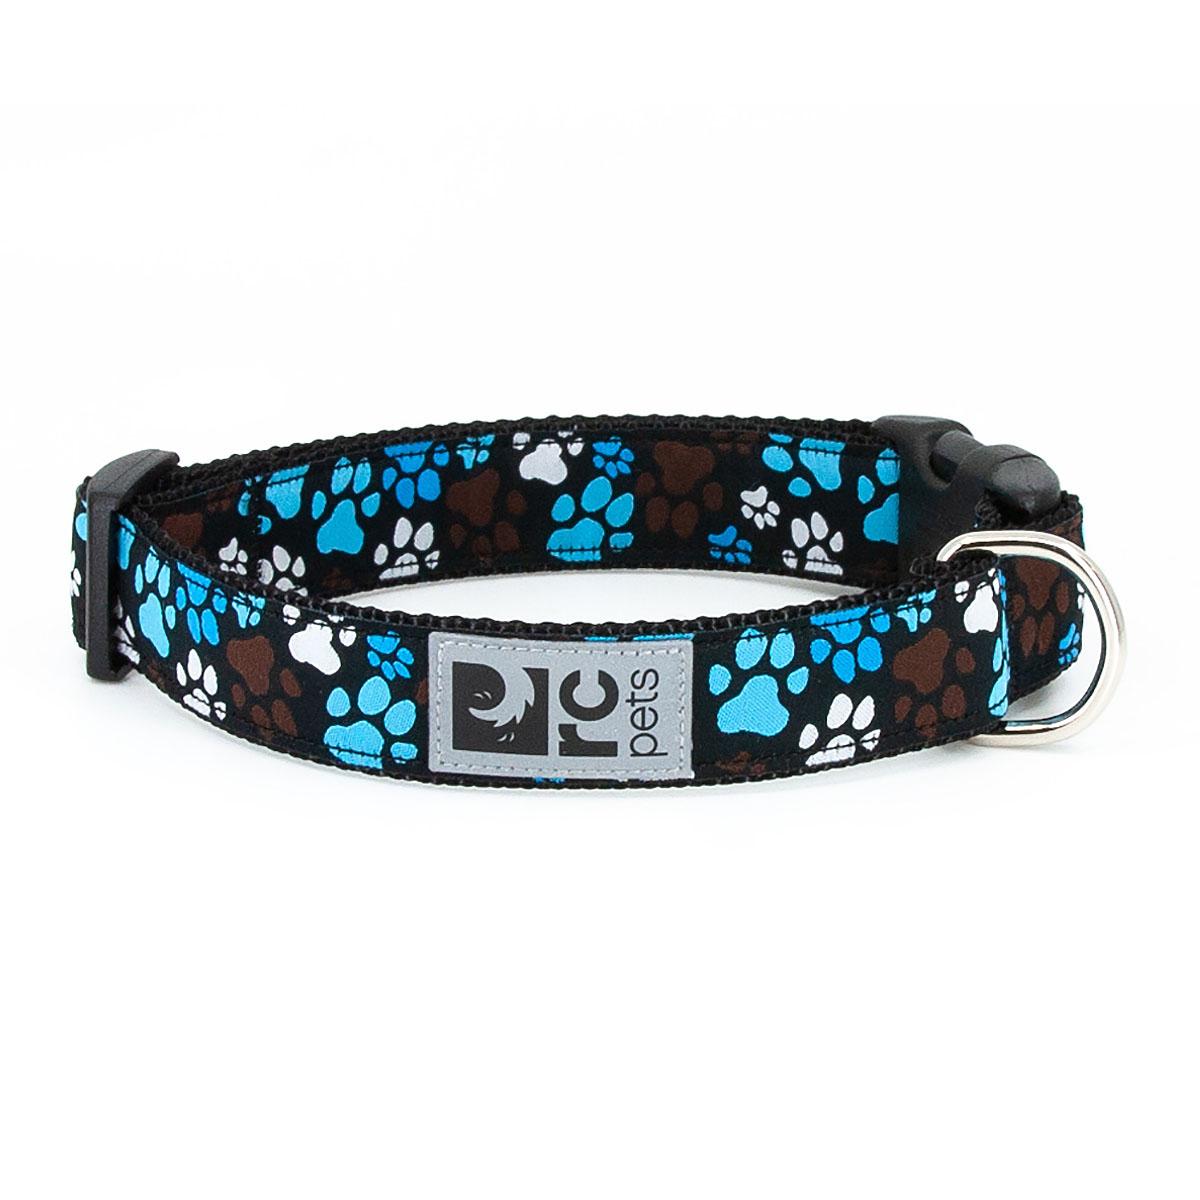 Pitter Patter Adjustable Clip Dog Collar by RC Pets - Chocolate